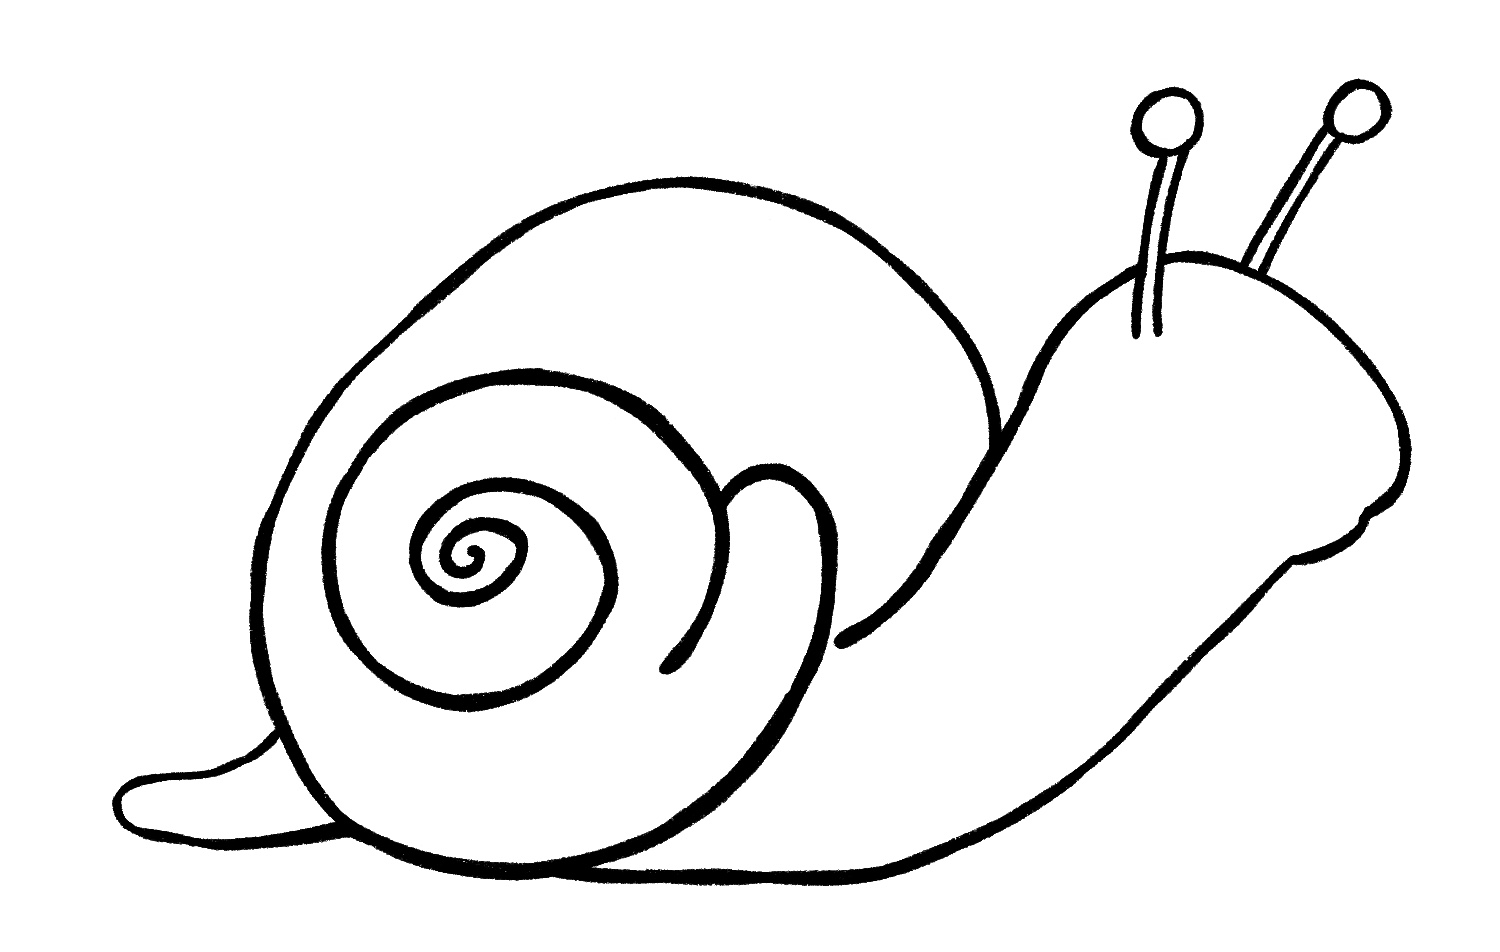 Drawing the snail